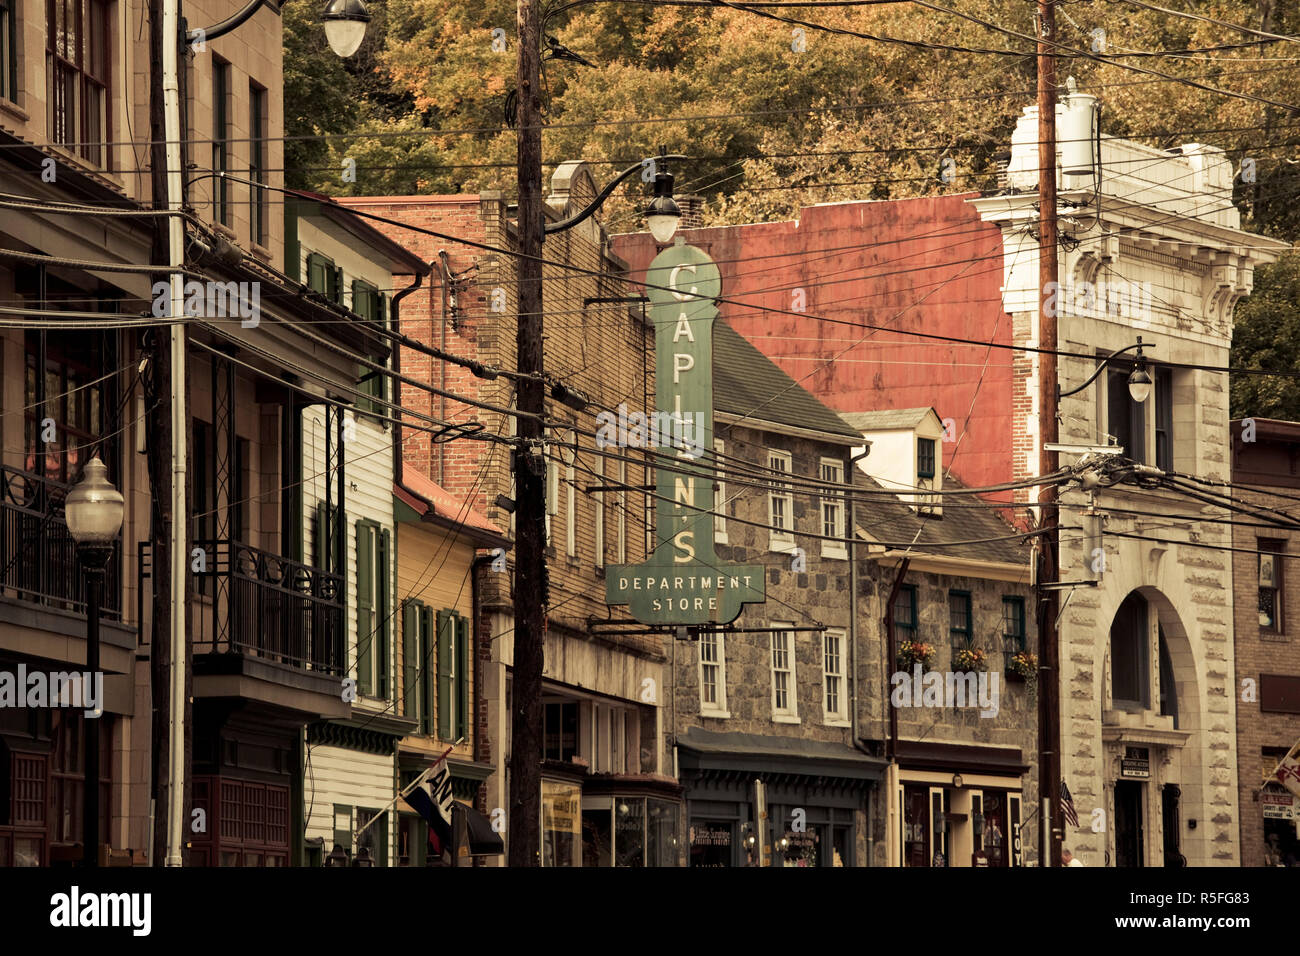 USA, Maryland, Ellicott City, former mill town, now antique center Stock Photo